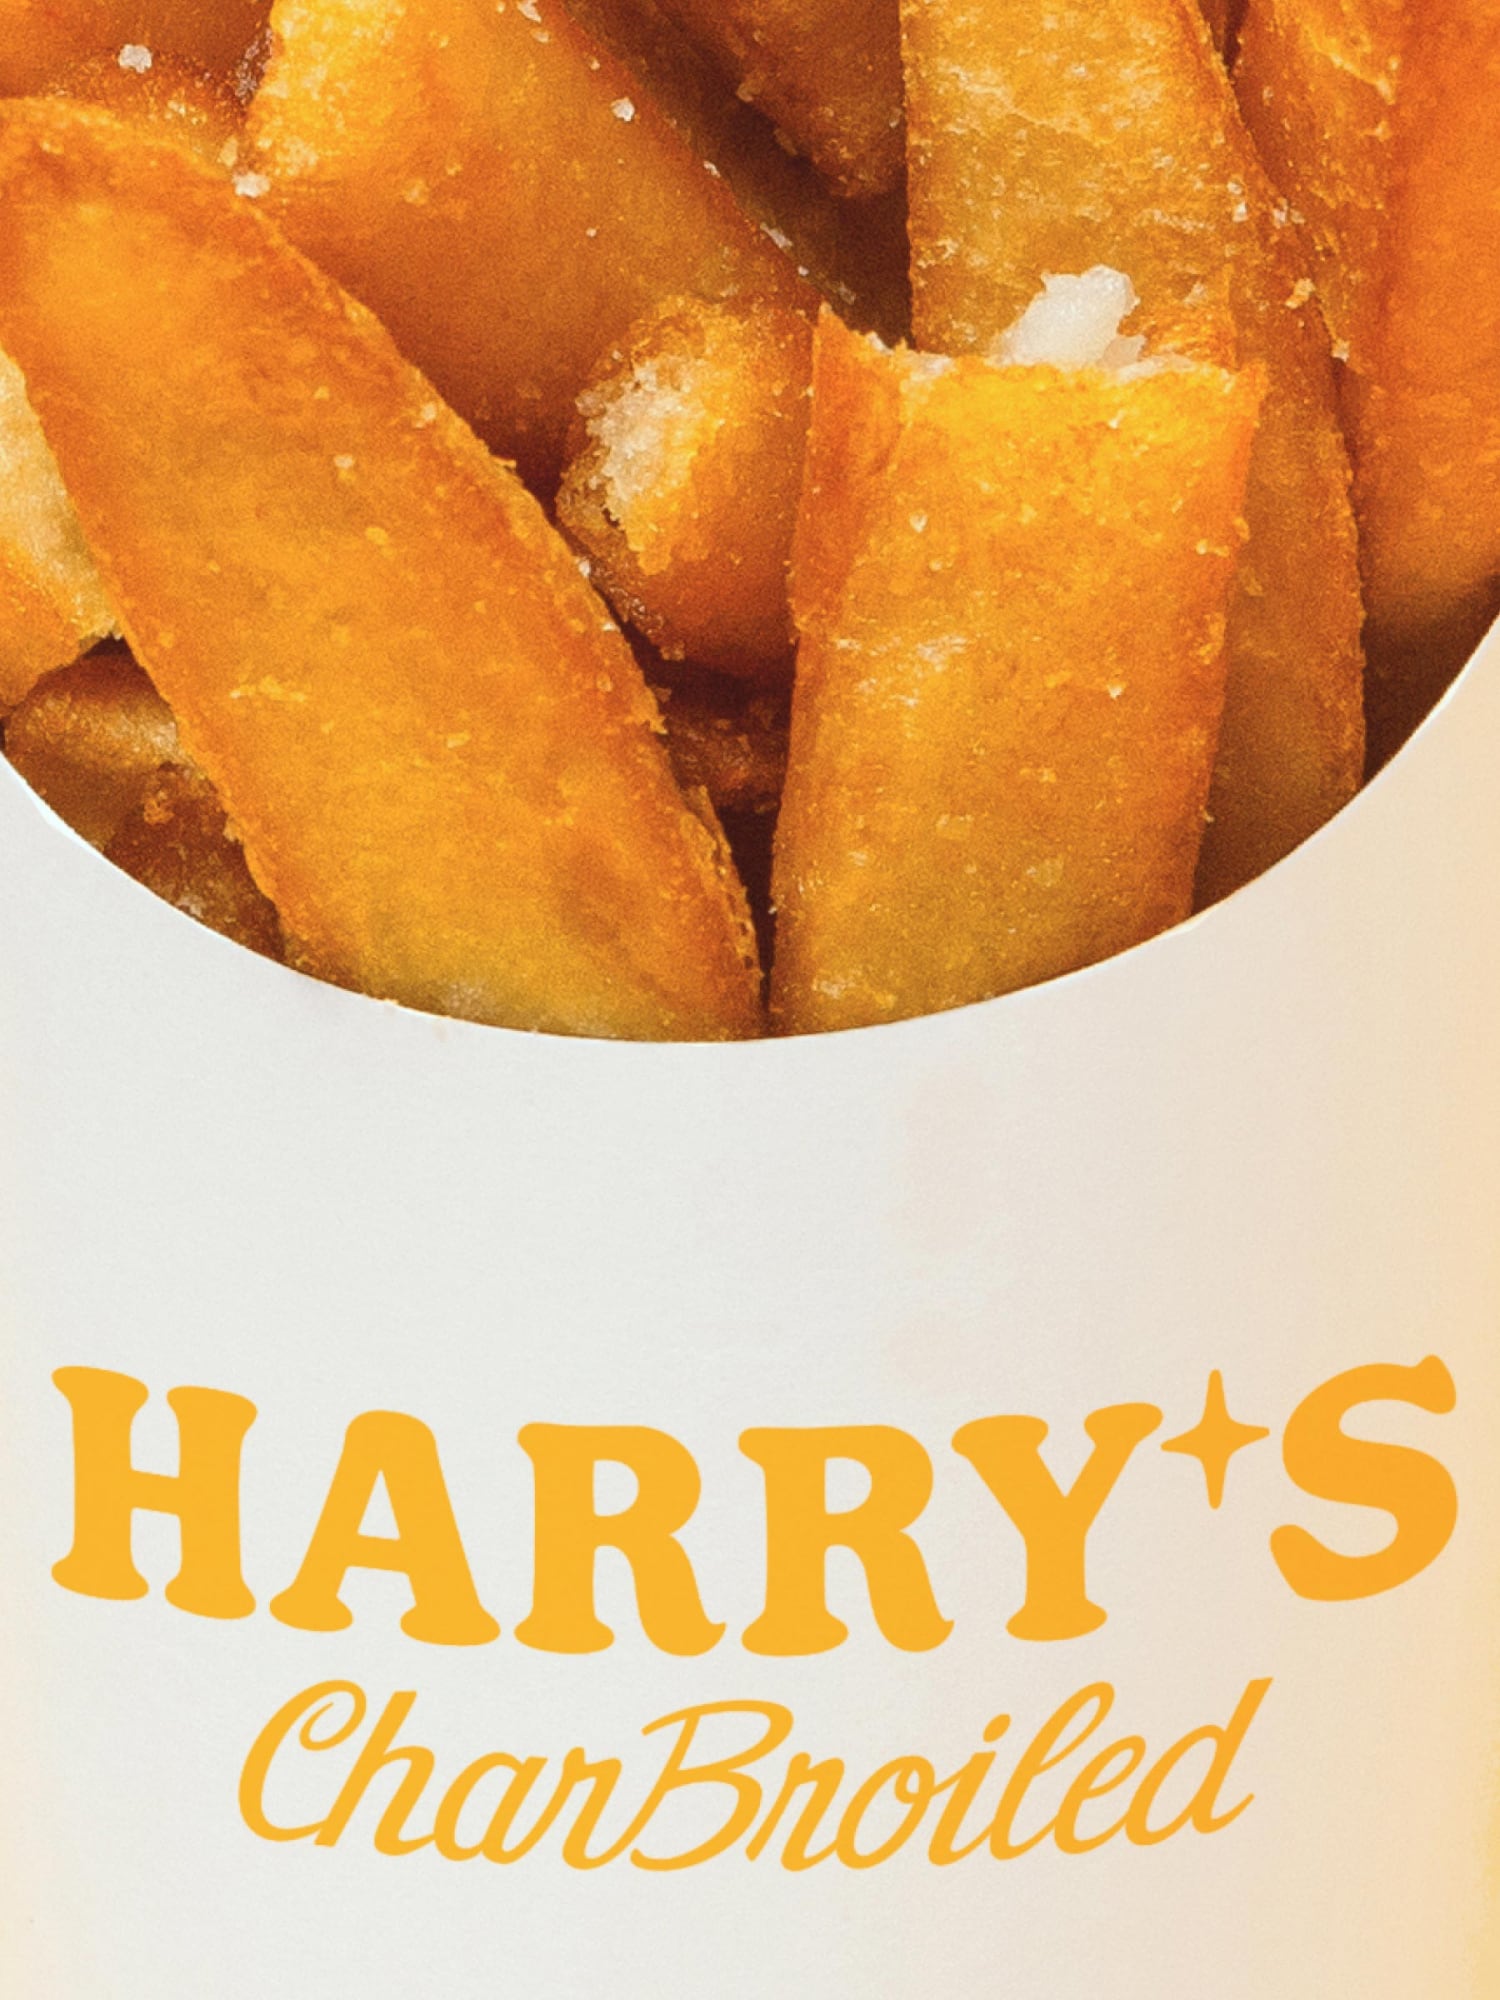 Detail of fries packaging with the Harry’s Charbroiled wordmark